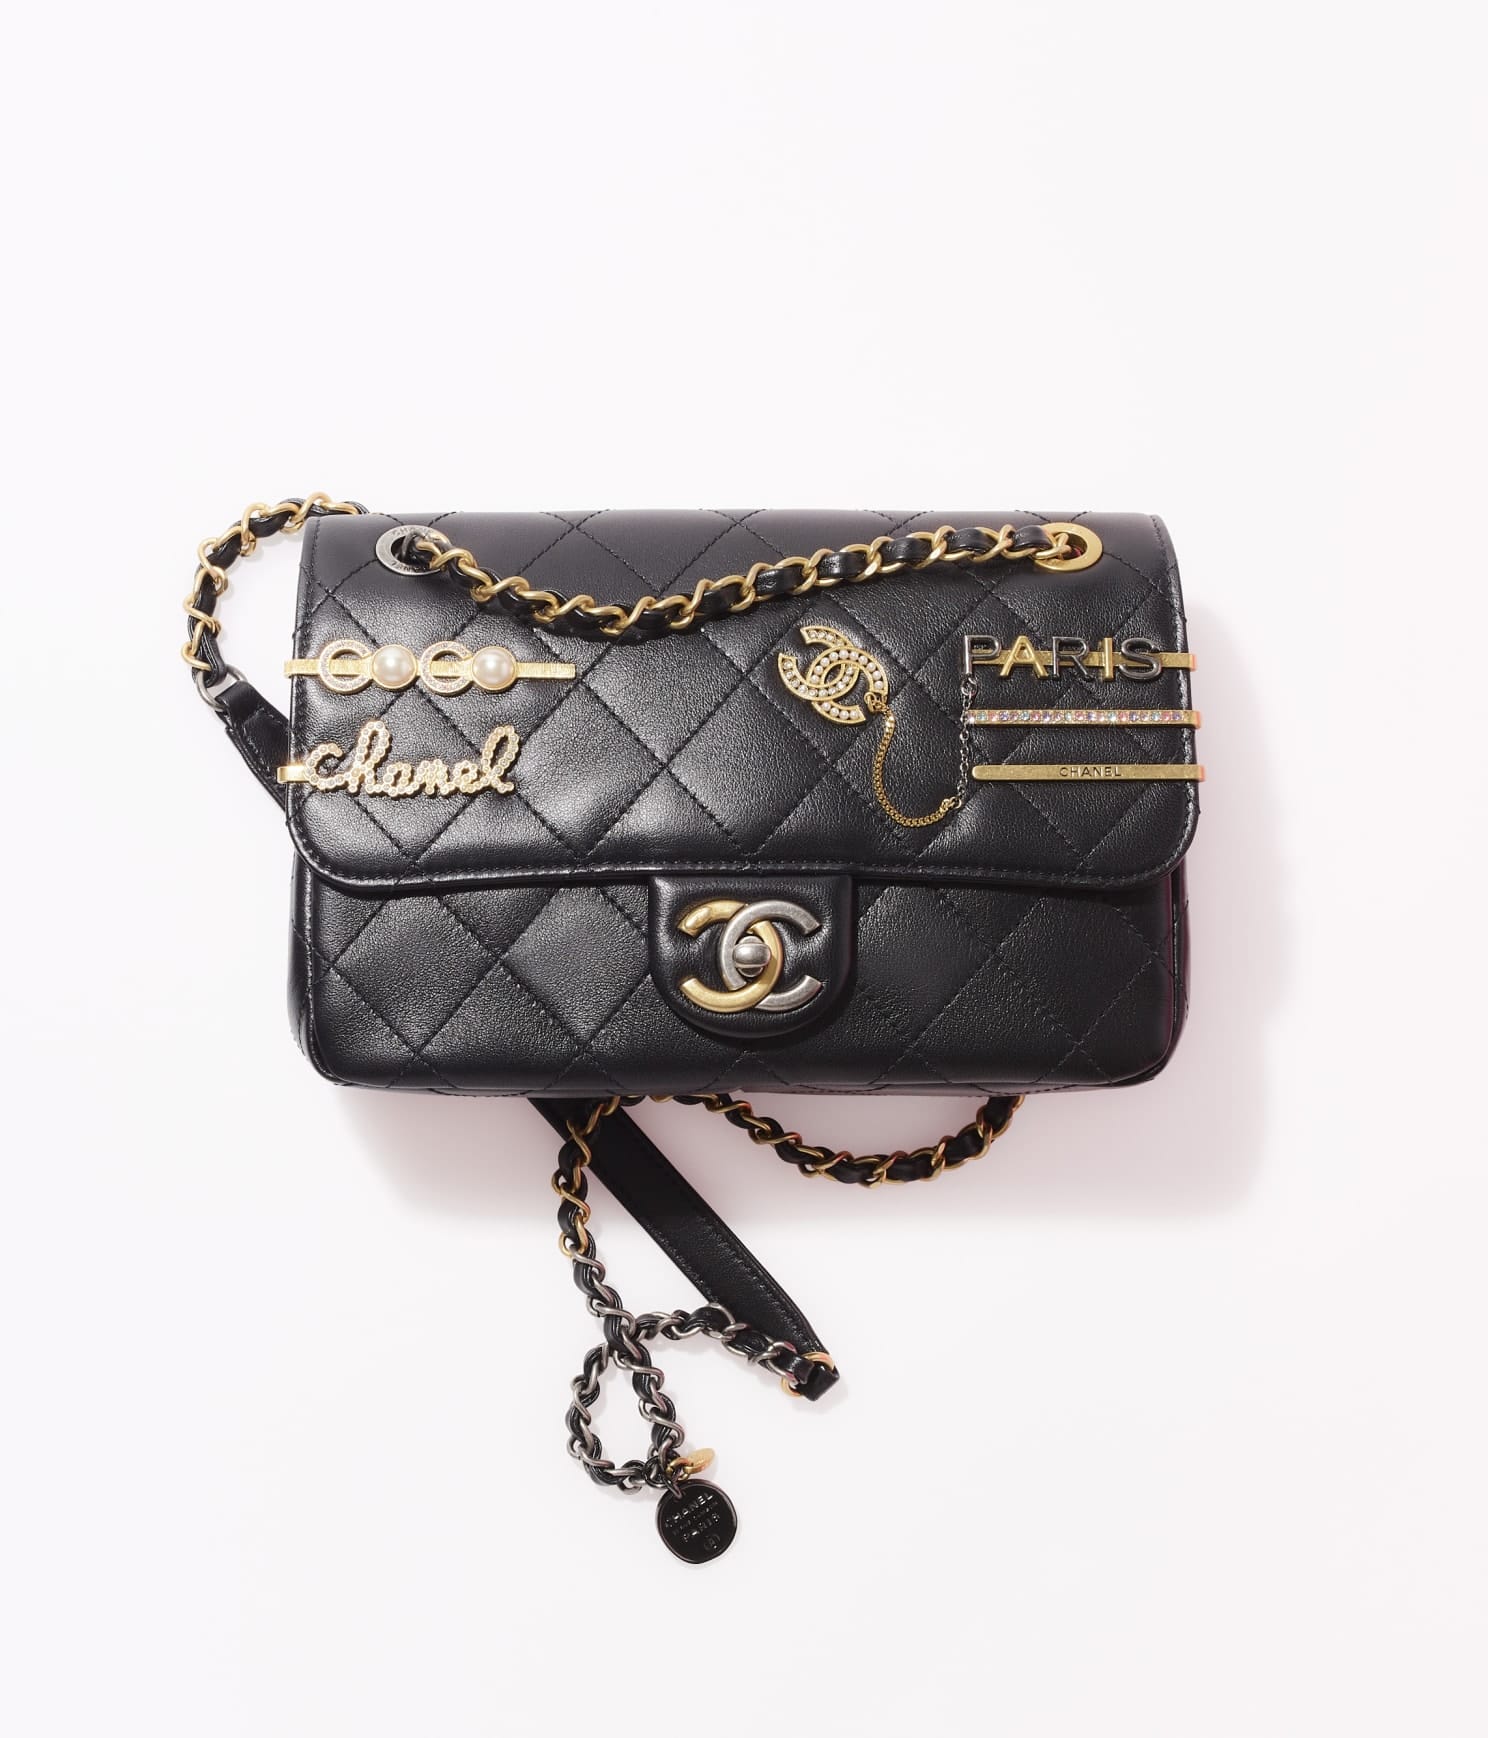 Chanel Boy Bag The ItGirl Staple  Handbags and Accessories  Sothebys